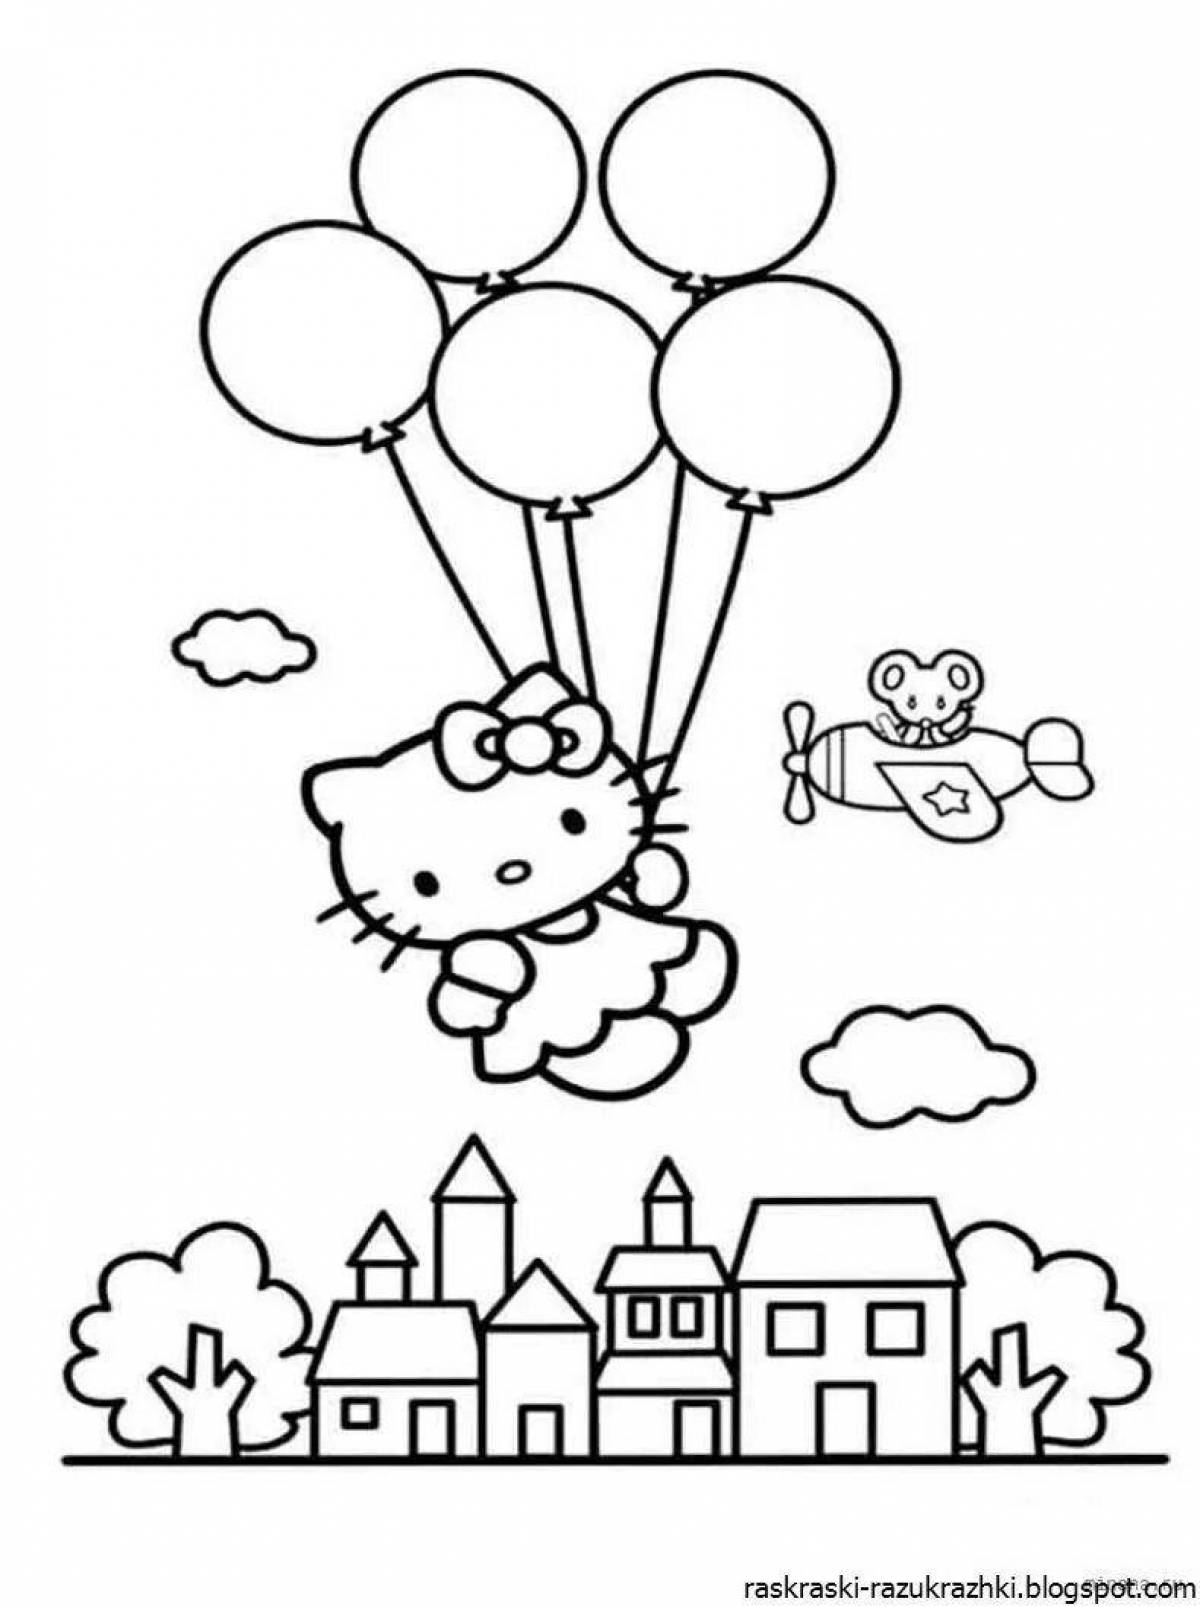 Colored balloon for children 4-5 years old